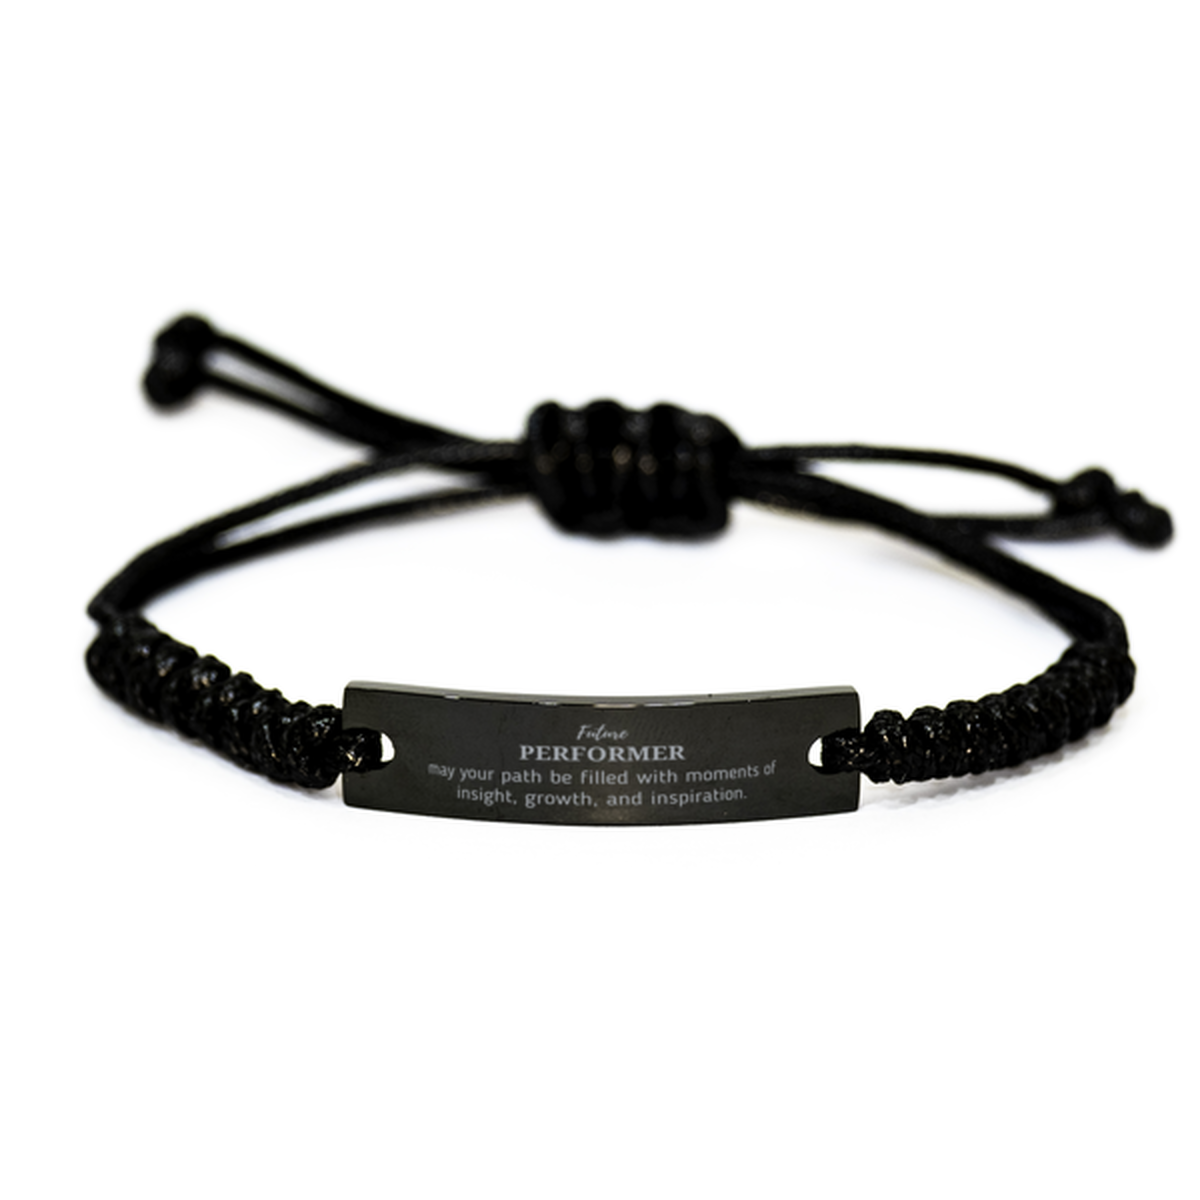 Future Performer Gifts, May your path be filled with moments of insight, Graduation Gifts for New Performer, Christmas Unique Black Rope Bracelet For Men, Women, Friends